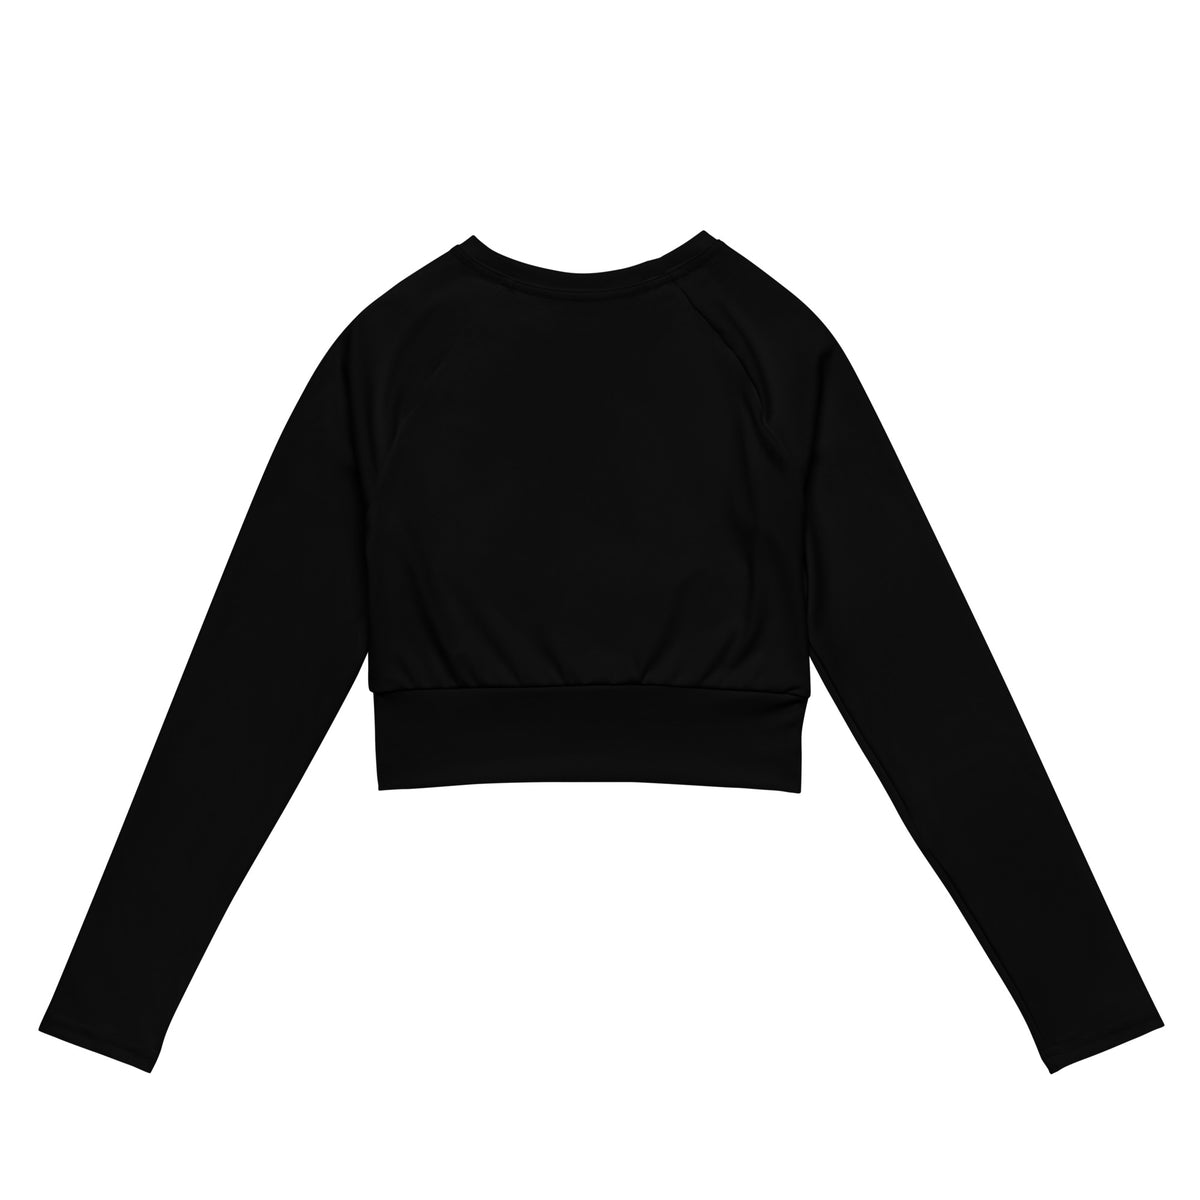 Lakeaholic Recycled long-sleeve crop top